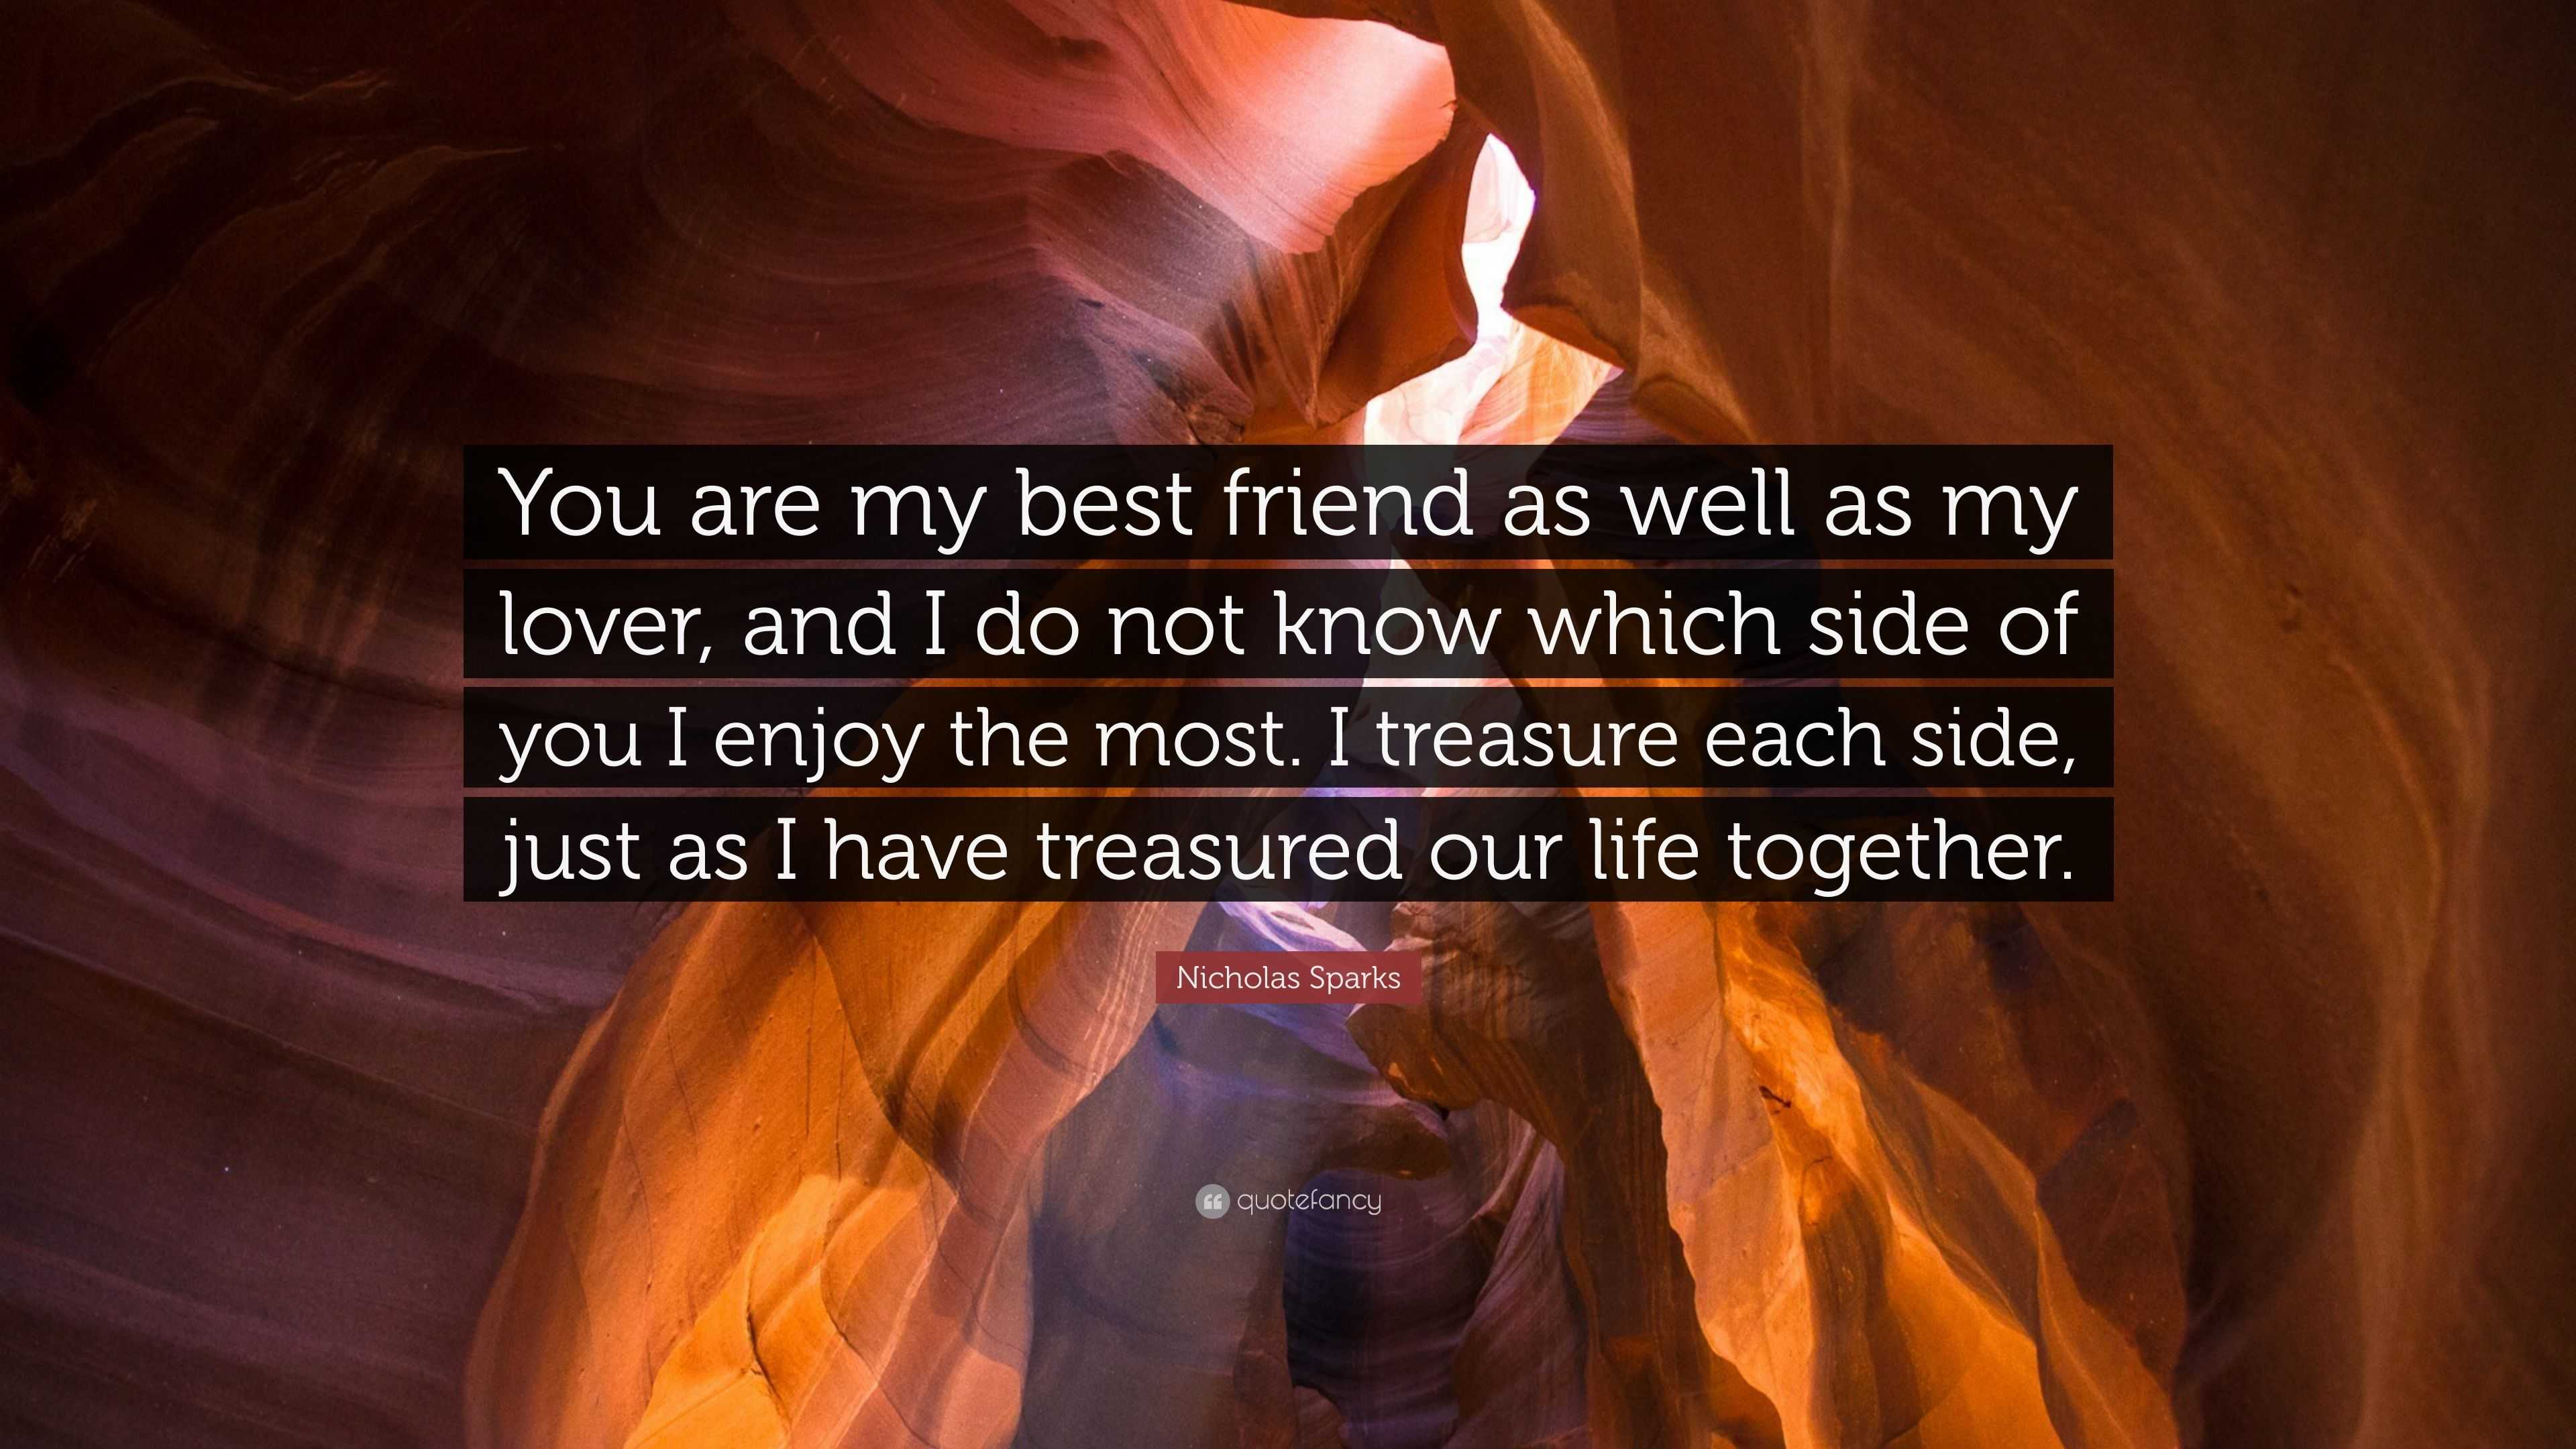 Love Quotes - “You are my best friend as well as my lover